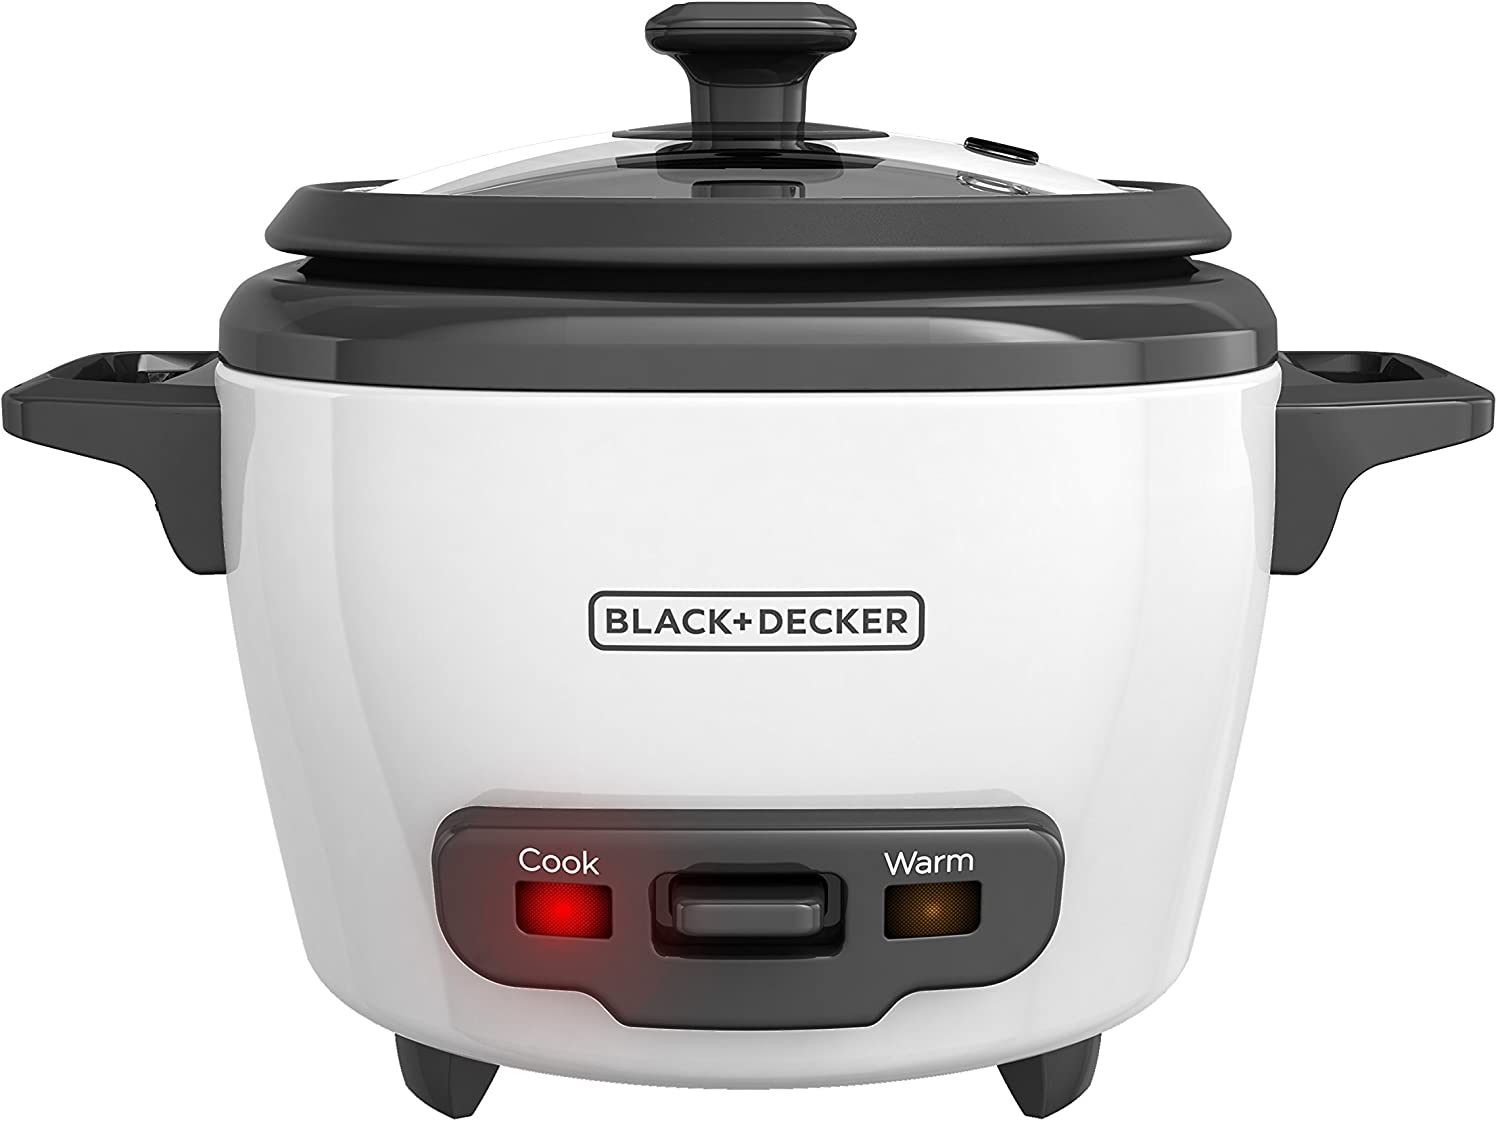 Black and Decker 3 Cup Rice Cooker Review